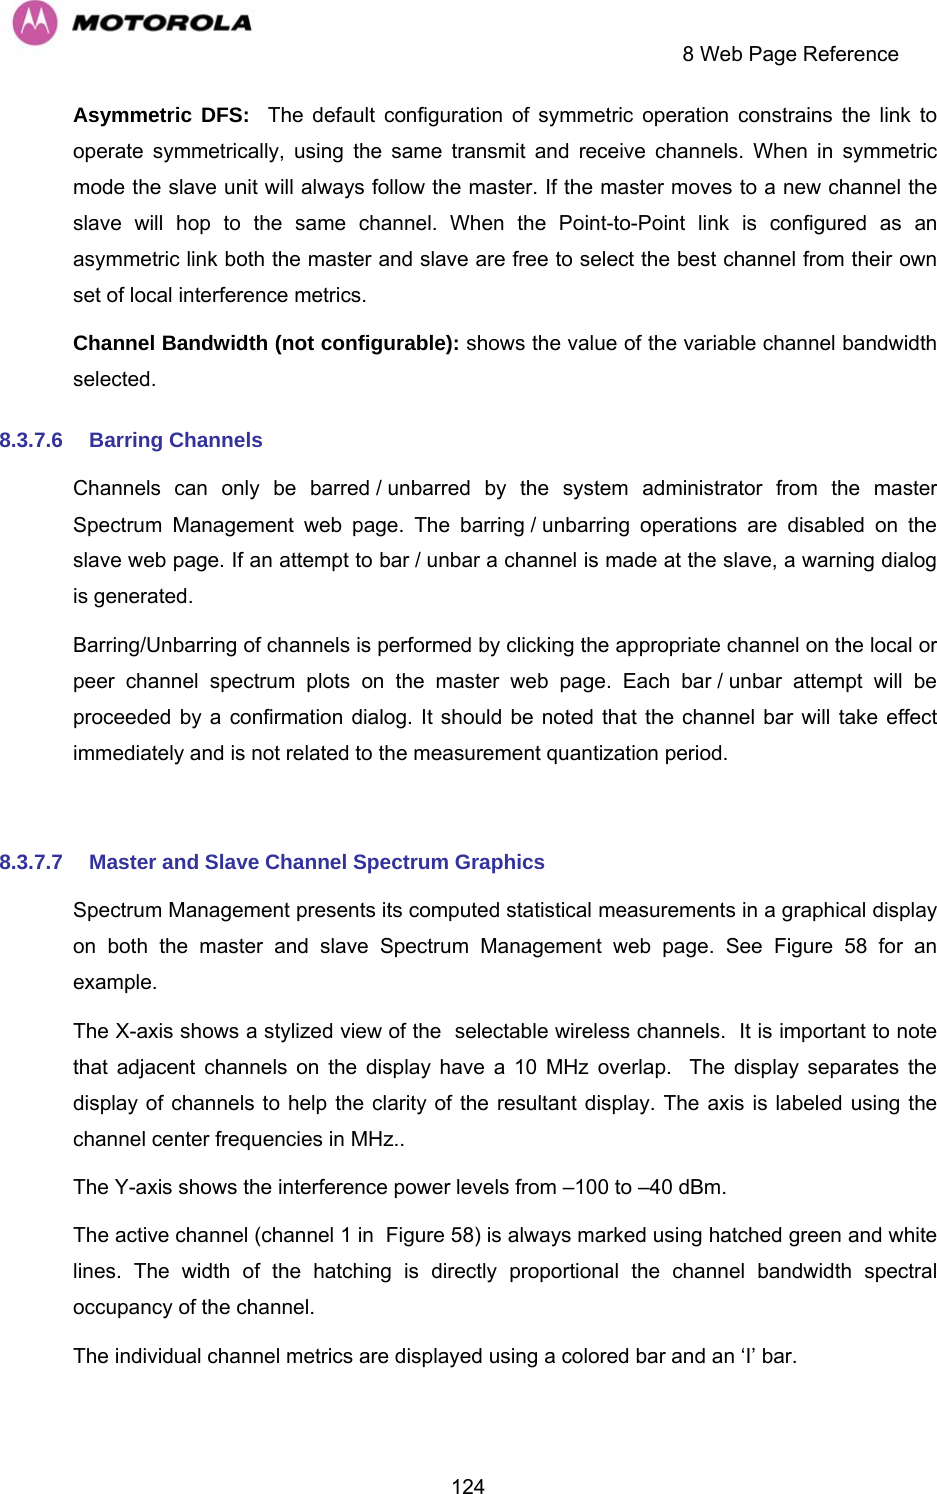     8 Web Page Reference  124Asymmetric DFS:  The default configuration of symmetric operation constrains the link to operate symmetrically, using the same transmit and receive channels. When in symmetric mode the slave unit will always follow the master. If the master moves to a new channel the slave will hop to the same channel. When the Point-to-Point link is configured as an asymmetric link both the master and slave are free to select the best channel from their own set of local interference metrics. Channel Bandwidth (not configurable): shows the value of the variable channel bandwidth selected. 8.3.7.6  Barring Channels Channels can only be barred / unbarred by the system administrator from the master Spectrum Management web page. The barring / unbarring operations are disabled on the slave web page. If an attempt to bar / unbar a channel is made at the slave, a warning dialog is generated.  Barring/Unbarring of channels is performed by clicking the appropriate channel on the local or peer channel spectrum plots on the master web page. Each bar / unbar attempt will be proceeded by a confirmation dialog. It should be noted that the channel bar will take effect immediately and is not related to the measurement quantization period.  8.3.7.7  Master and Slave Channel Spectrum Graphics Spectrum Management presents its computed statistical measurements in a graphical display on both the master and slave Spectrum Management web page. See Figure 58 for an example. The X-axis shows a stylized view of the  selectable wireless channels.  It is important to note that adjacent channels on the display have a 10 MHz overlap.  The display separates the display of channels to help the clarity of the resultant display. The axis is labeled using the channel center frequencies in MHz.. The Y-axis shows the interference power levels from –100 to –40 dBm.  The active channel (channel 1 in  Figure 58) is always marked using hatched green and white lines. The width of the hatching is directly proportional the channel bandwidth spectral occupancy of the channel. The individual channel metrics are displayed using a colored bar and an ‘I’ bar. 